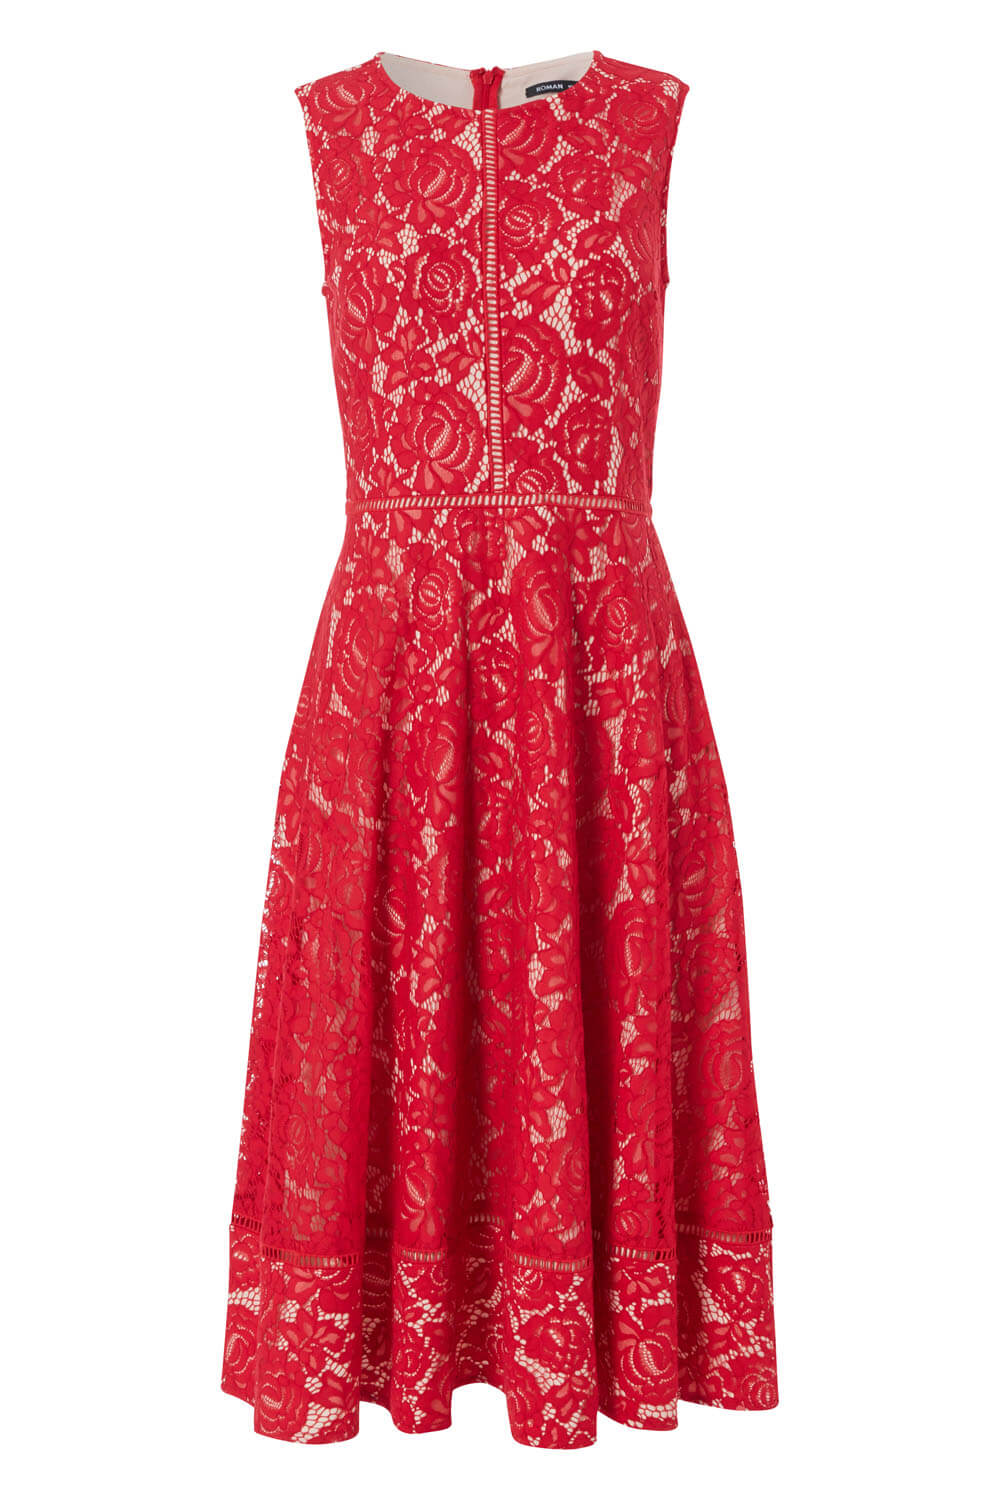 Fit And Flare Lace Midi Dress in Red - Roman Originals UK